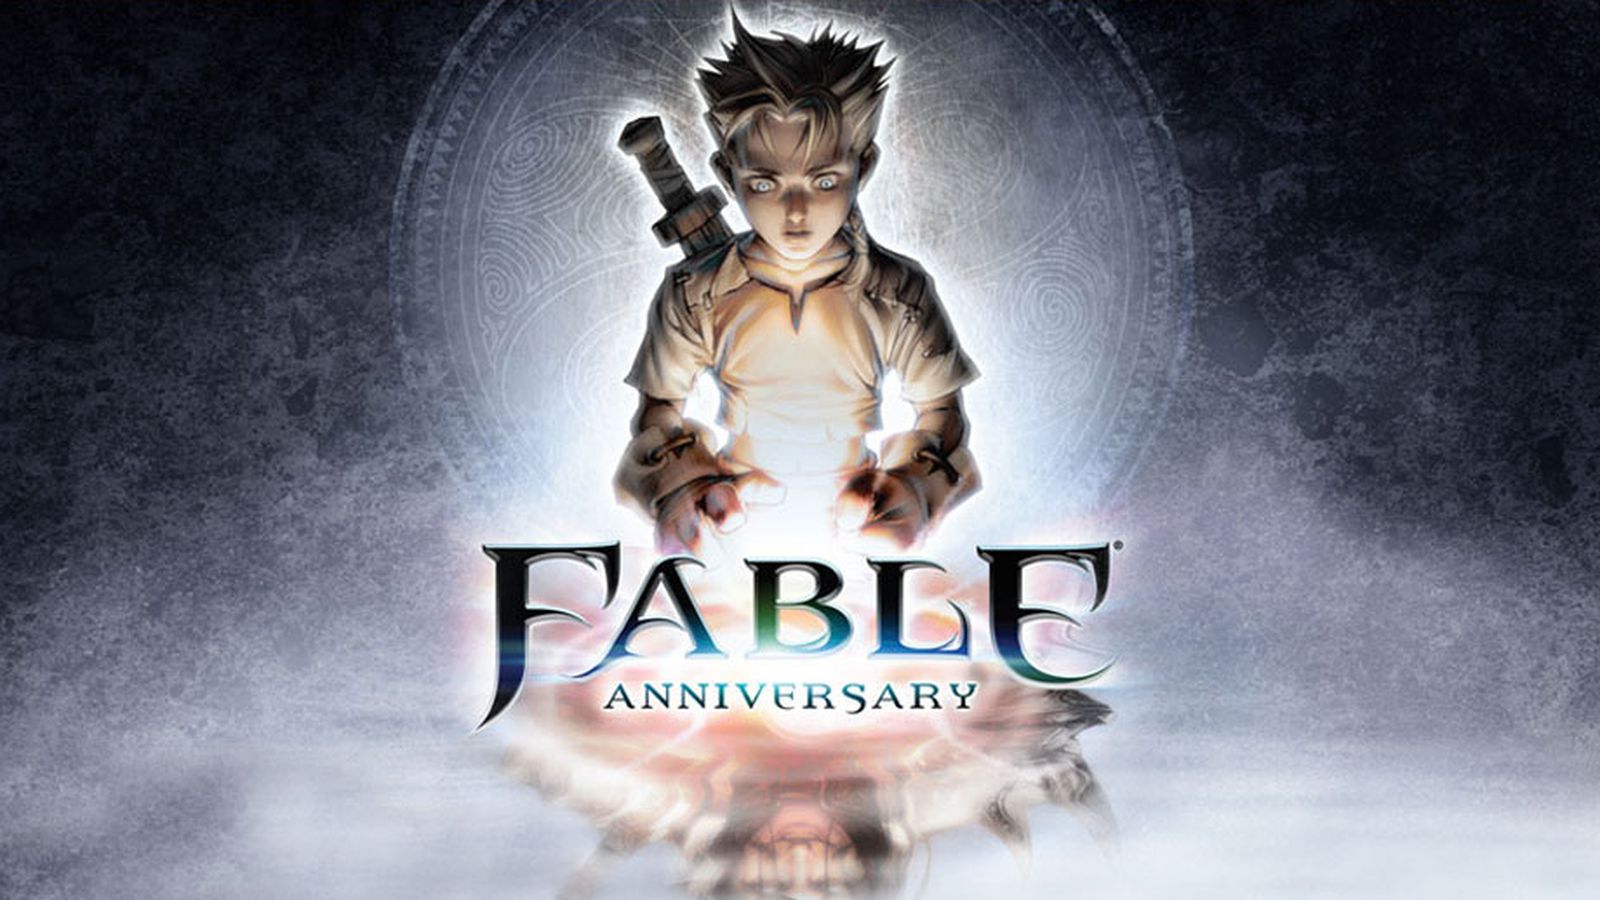 Fable steam